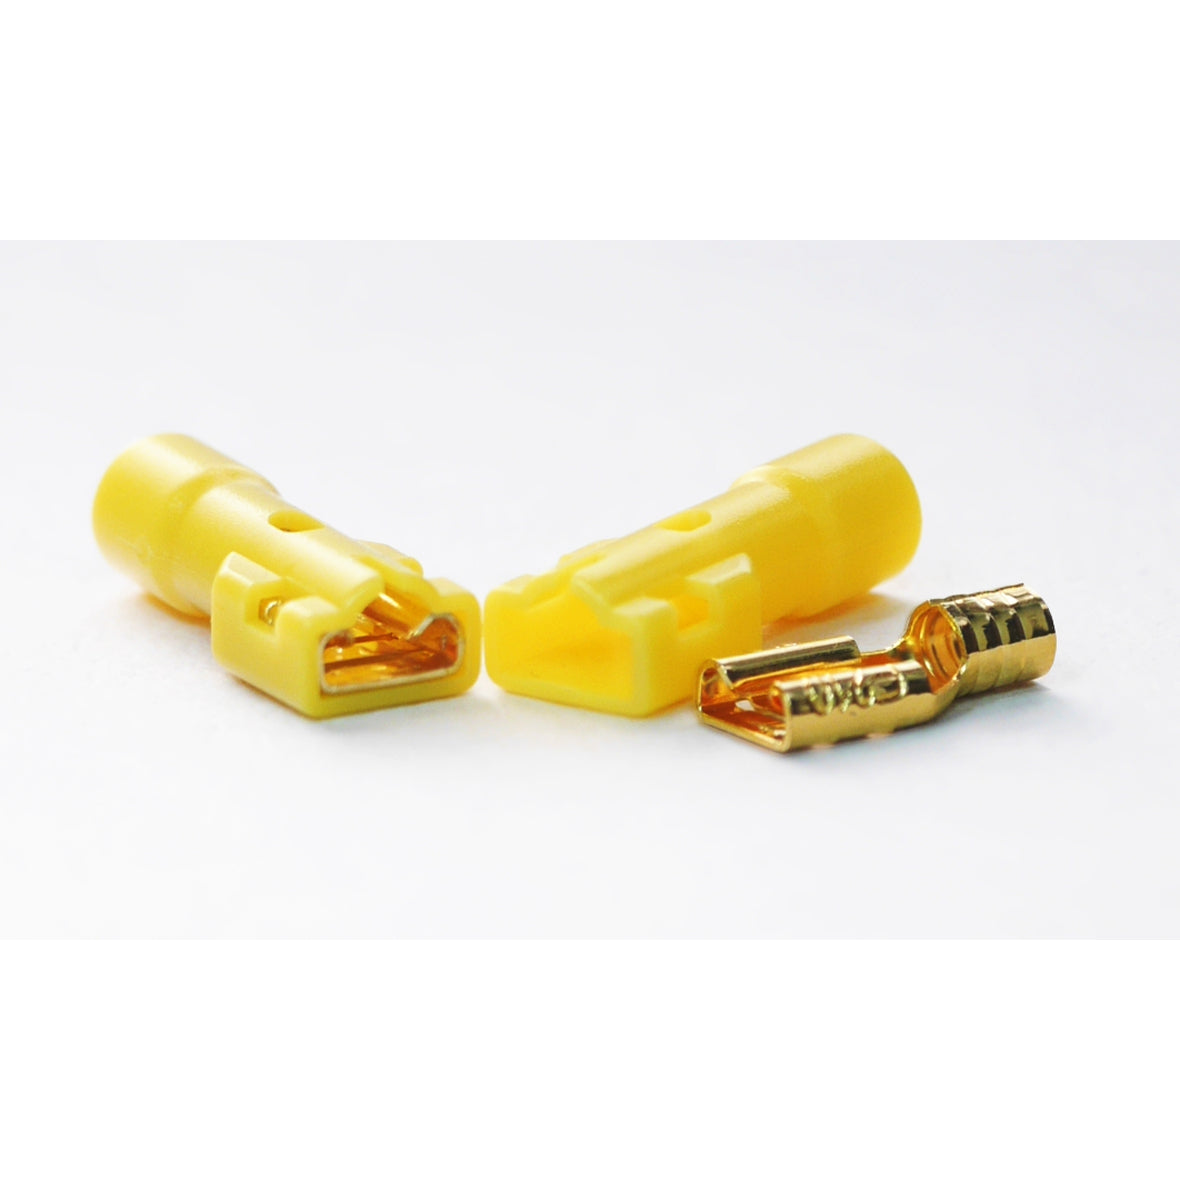 Furutech FT-210(G) Insulated Push-on Disconnect Terminal (pack of 10)